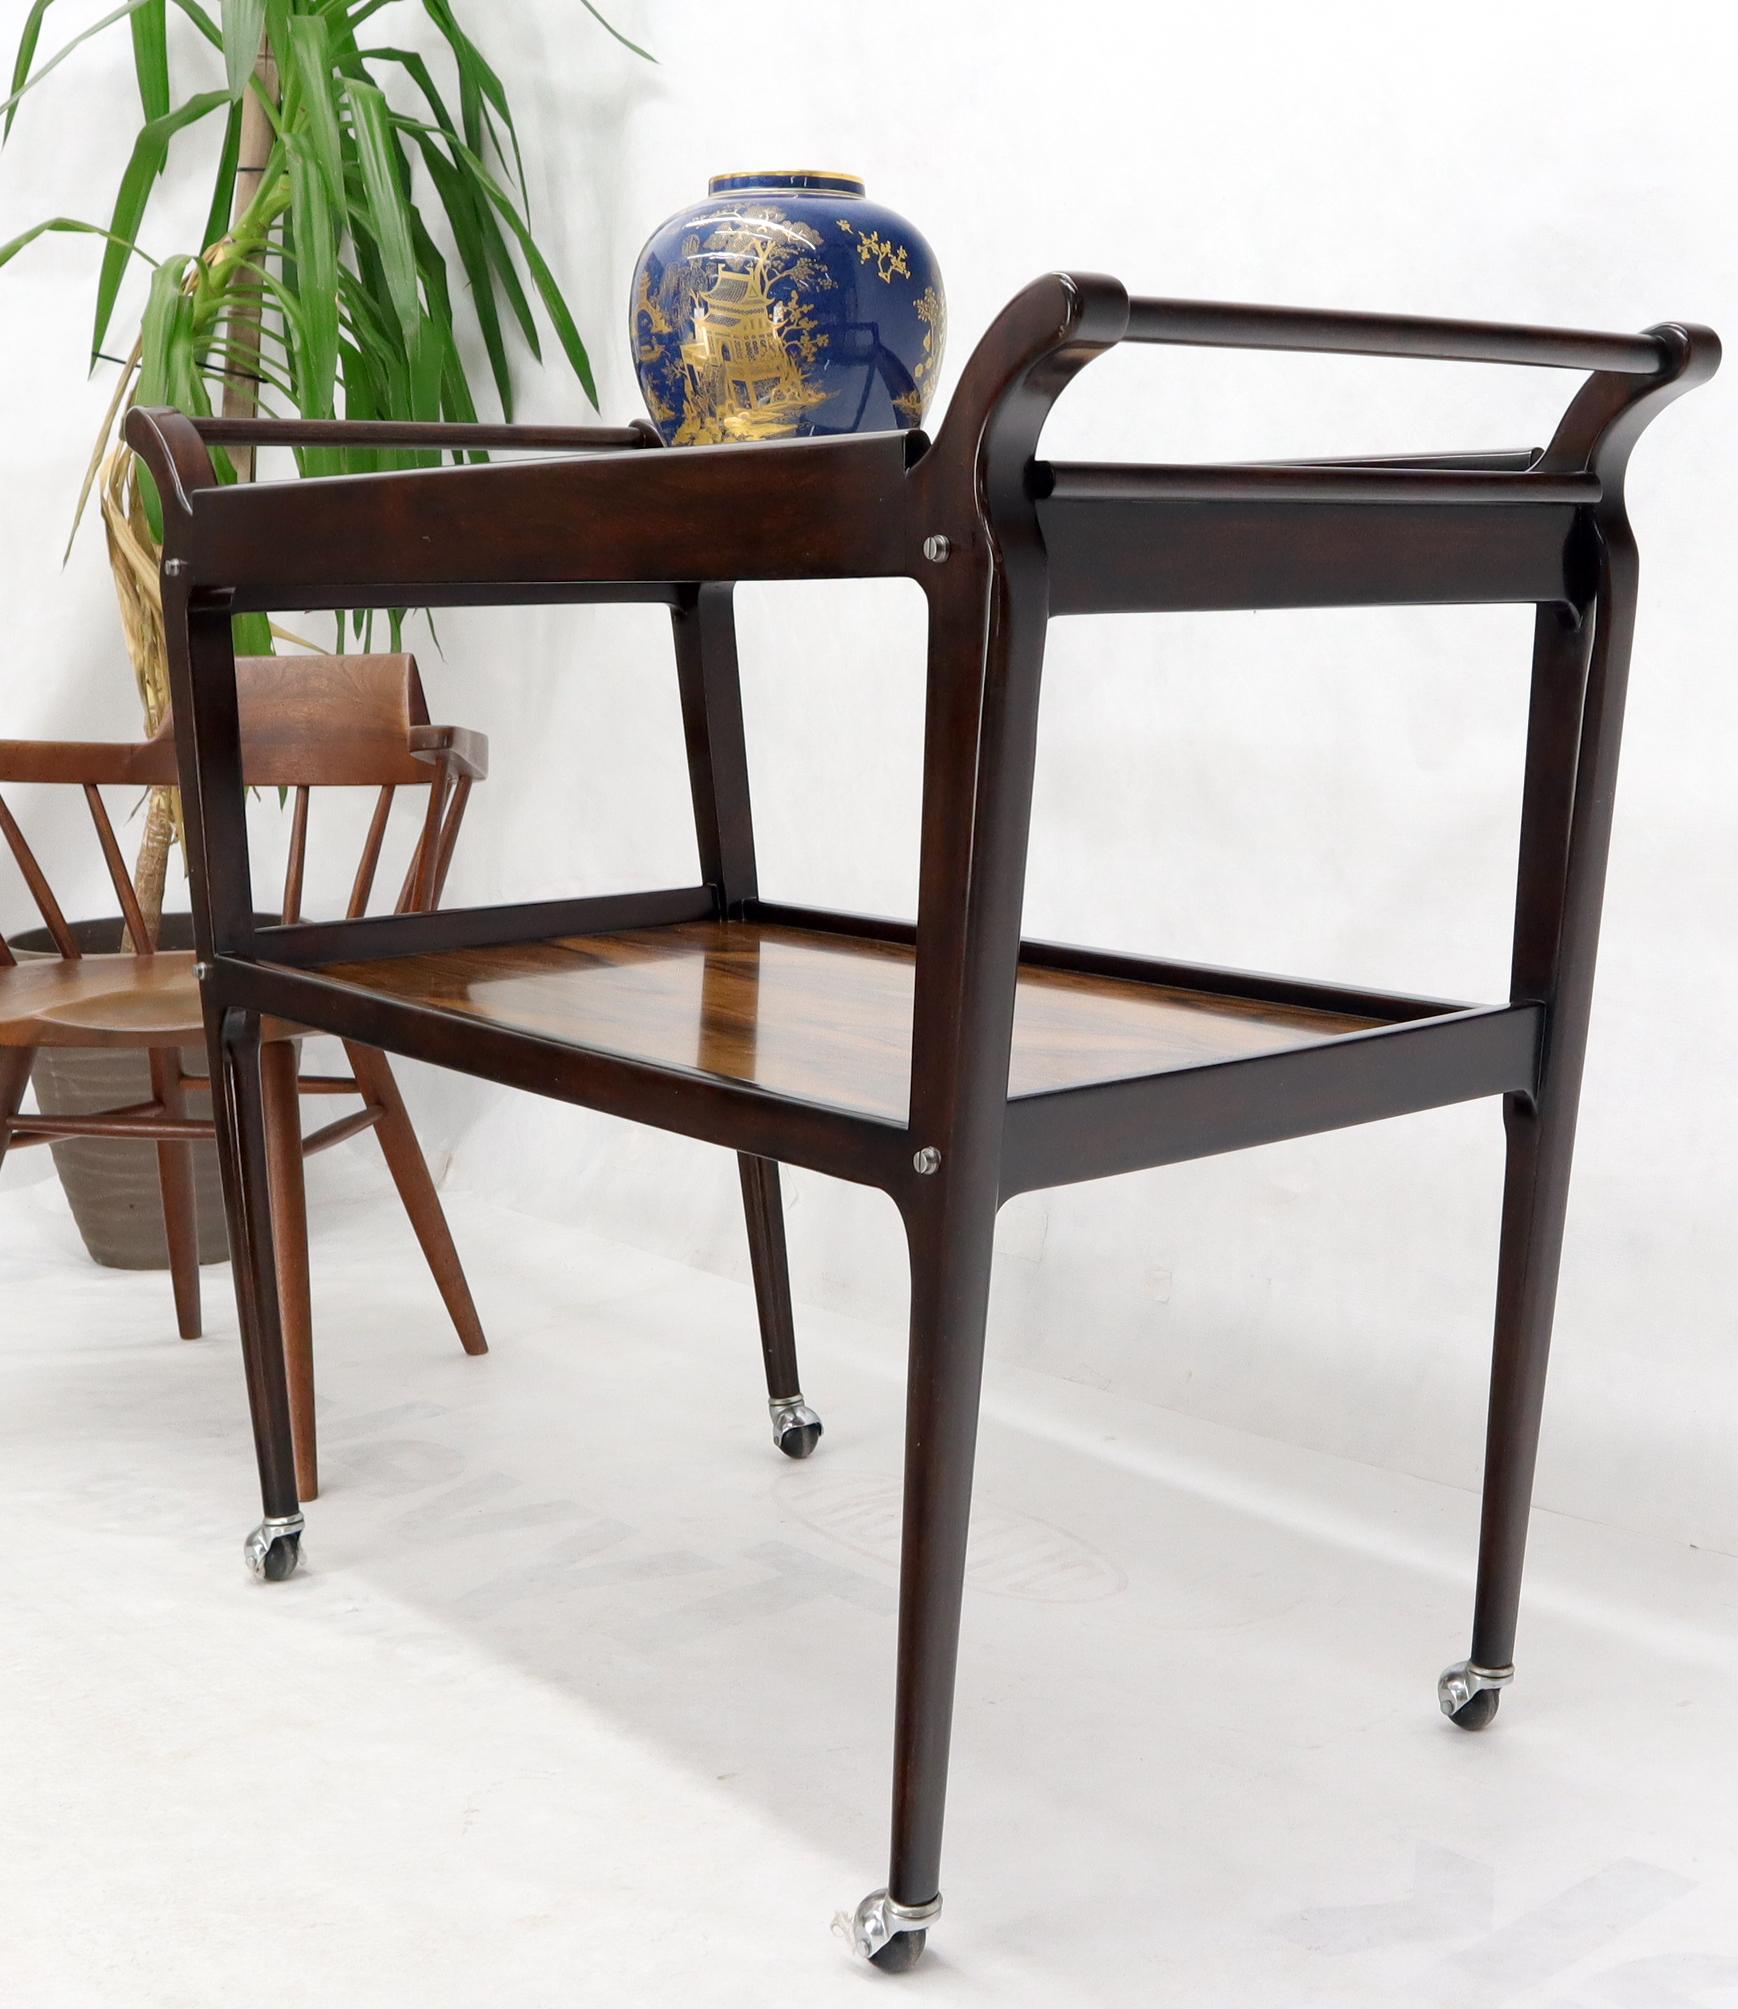 Mid-Century Modern rosewood two tier serving cart table on wheels.